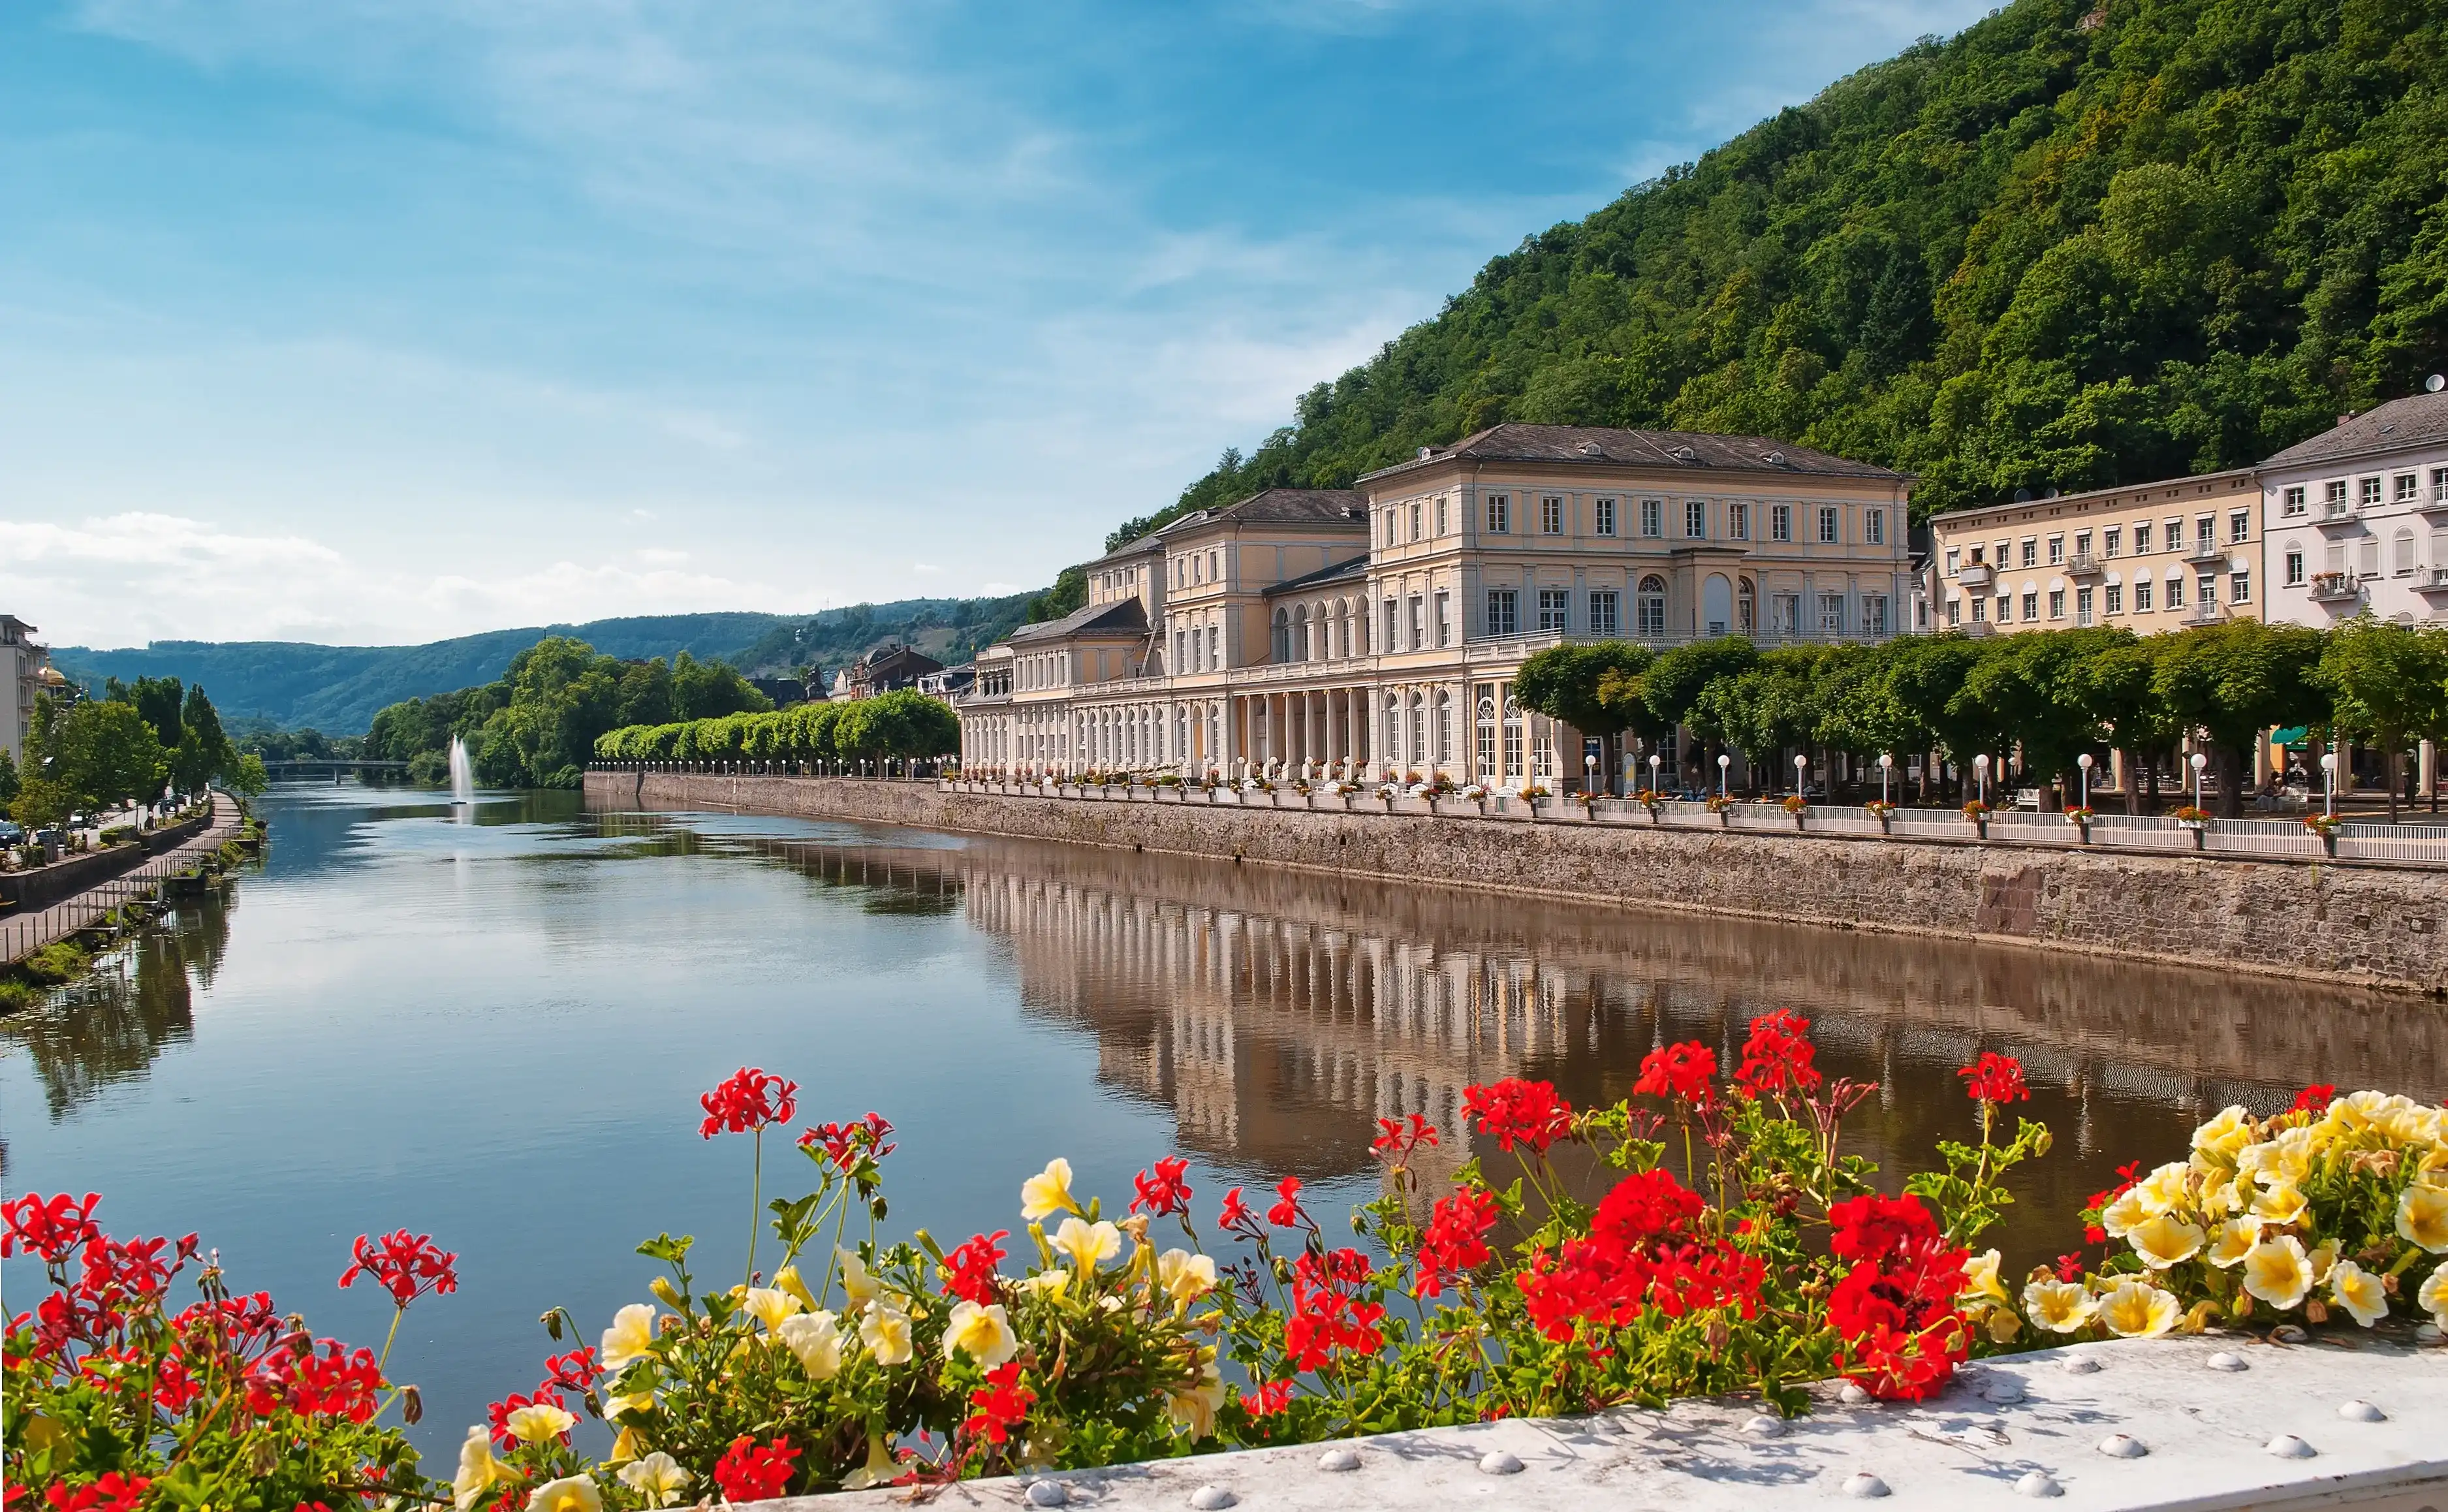 Best Bad Ems hotels. Cheap hotels in Bad Ems, Germany